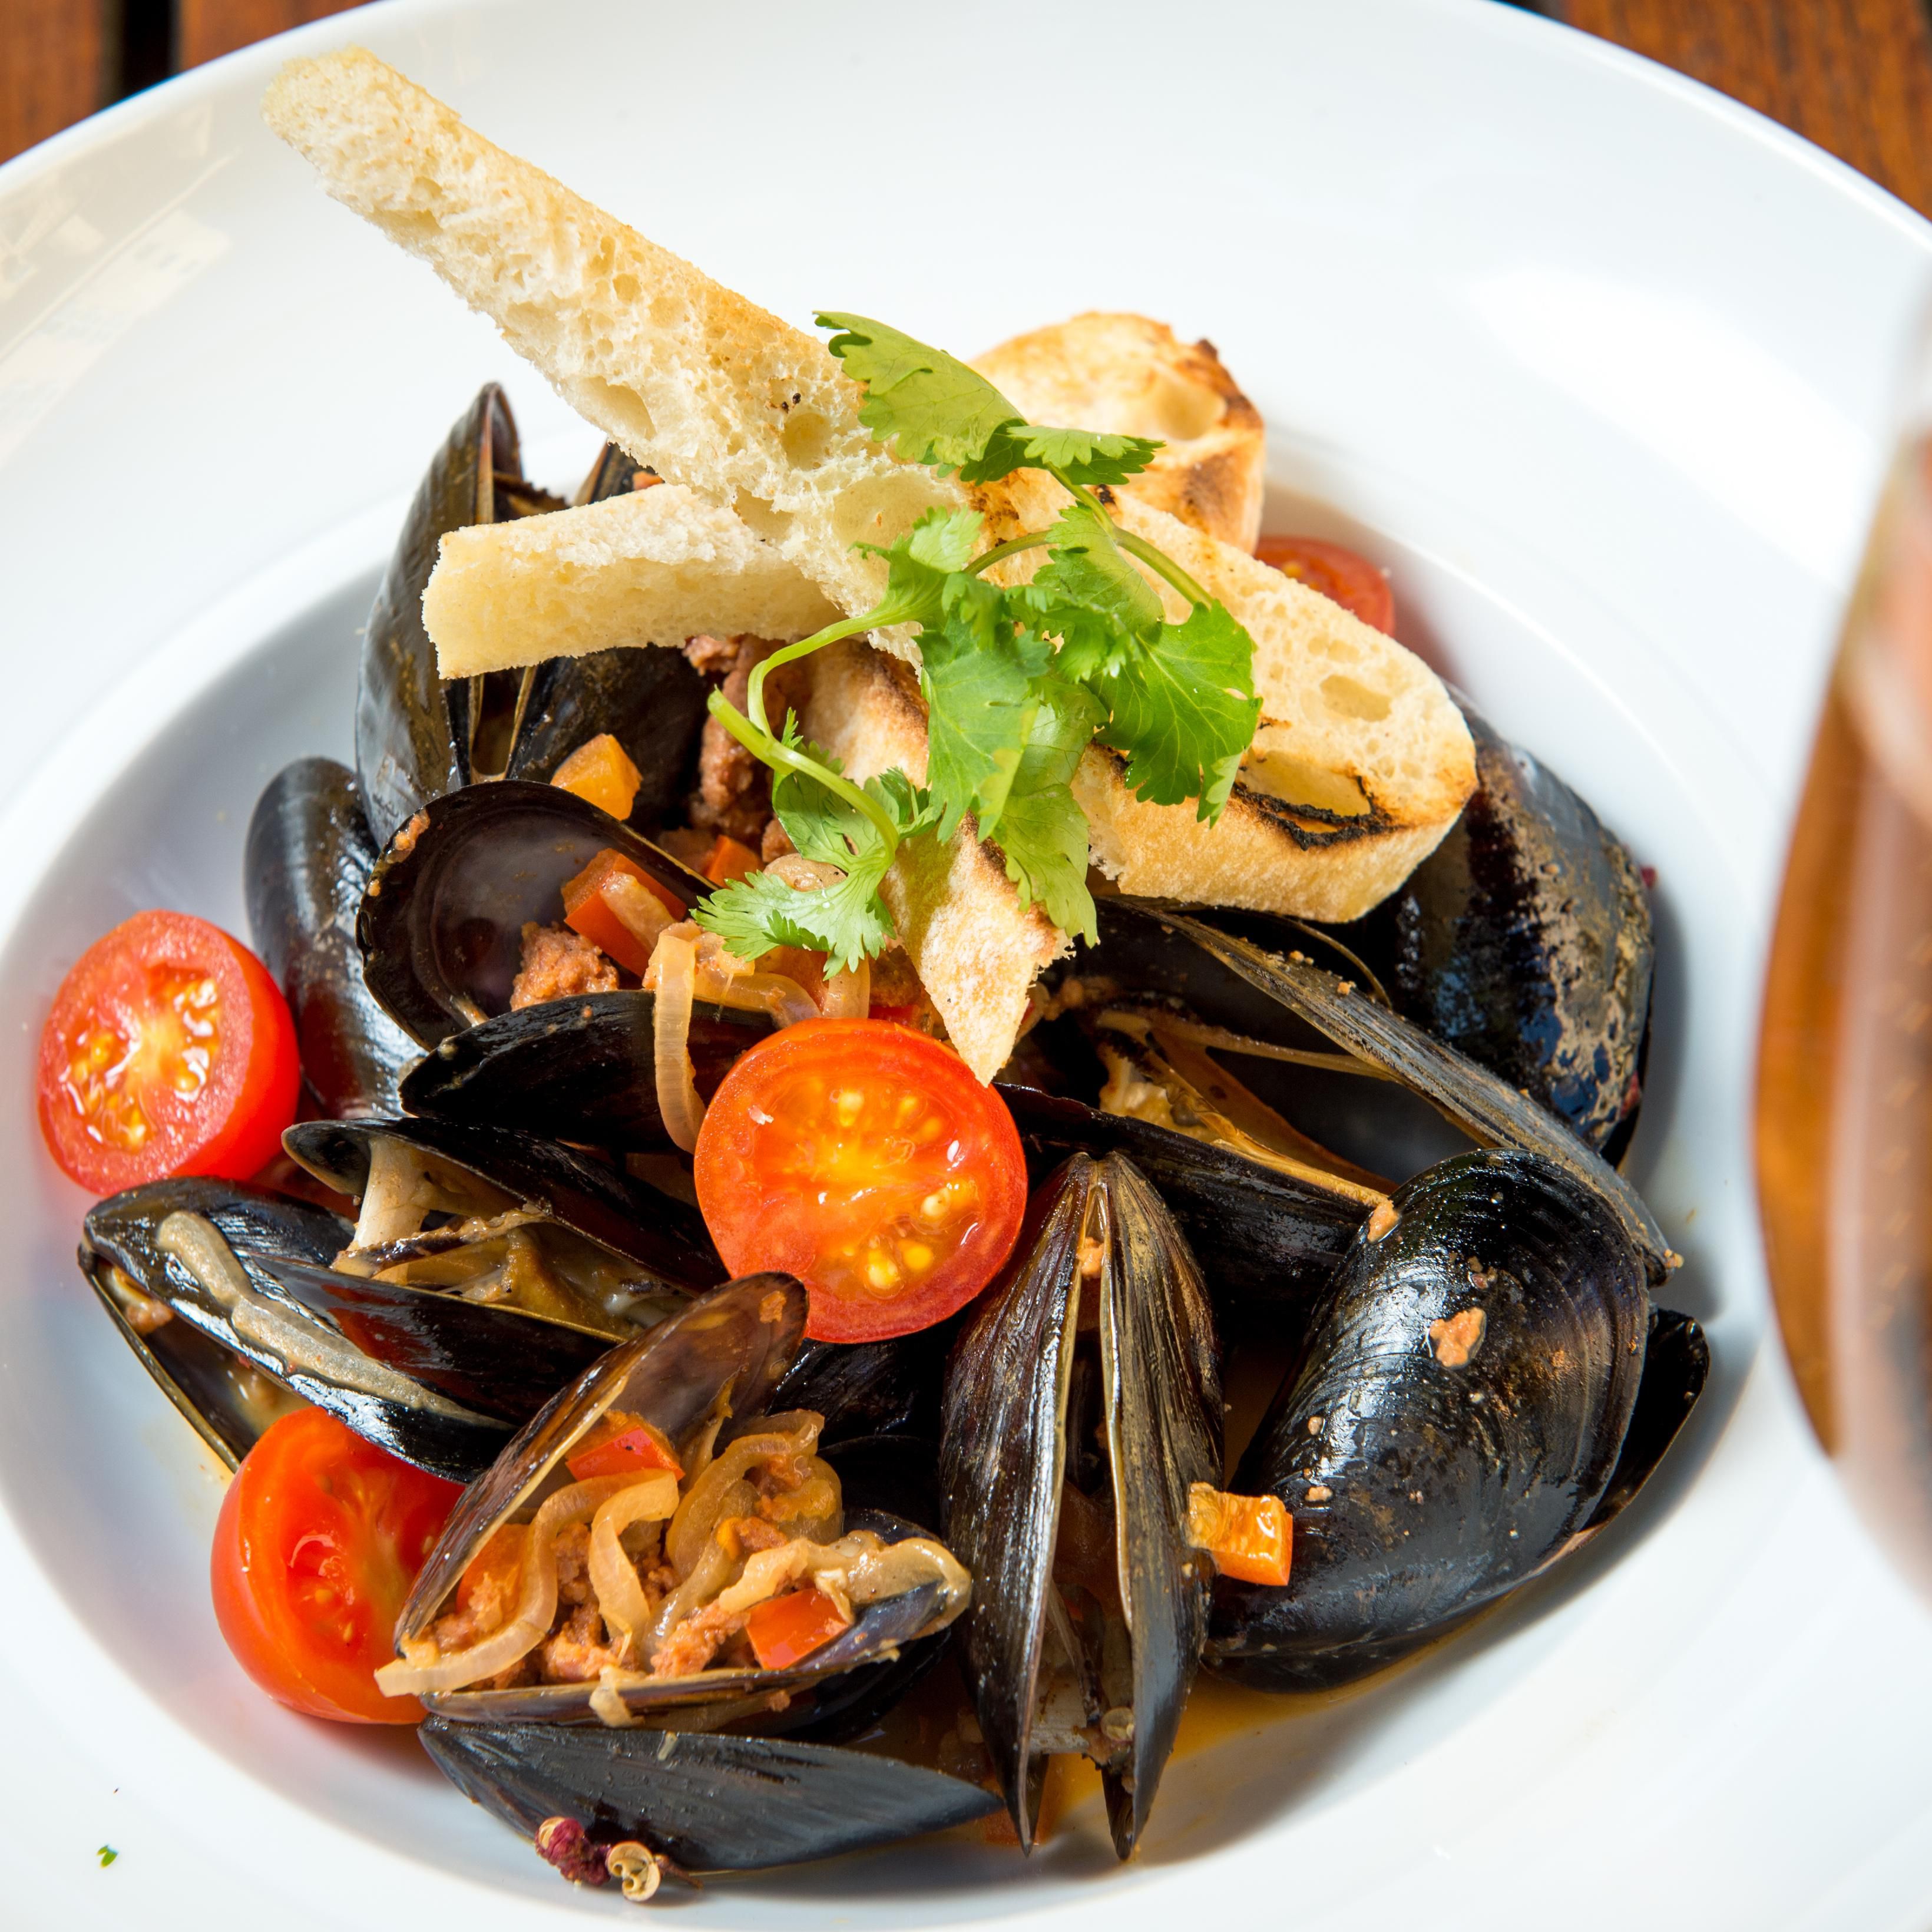 Indulge in the flavors of Palo Alto at 4290 Bistro &amp; Bar